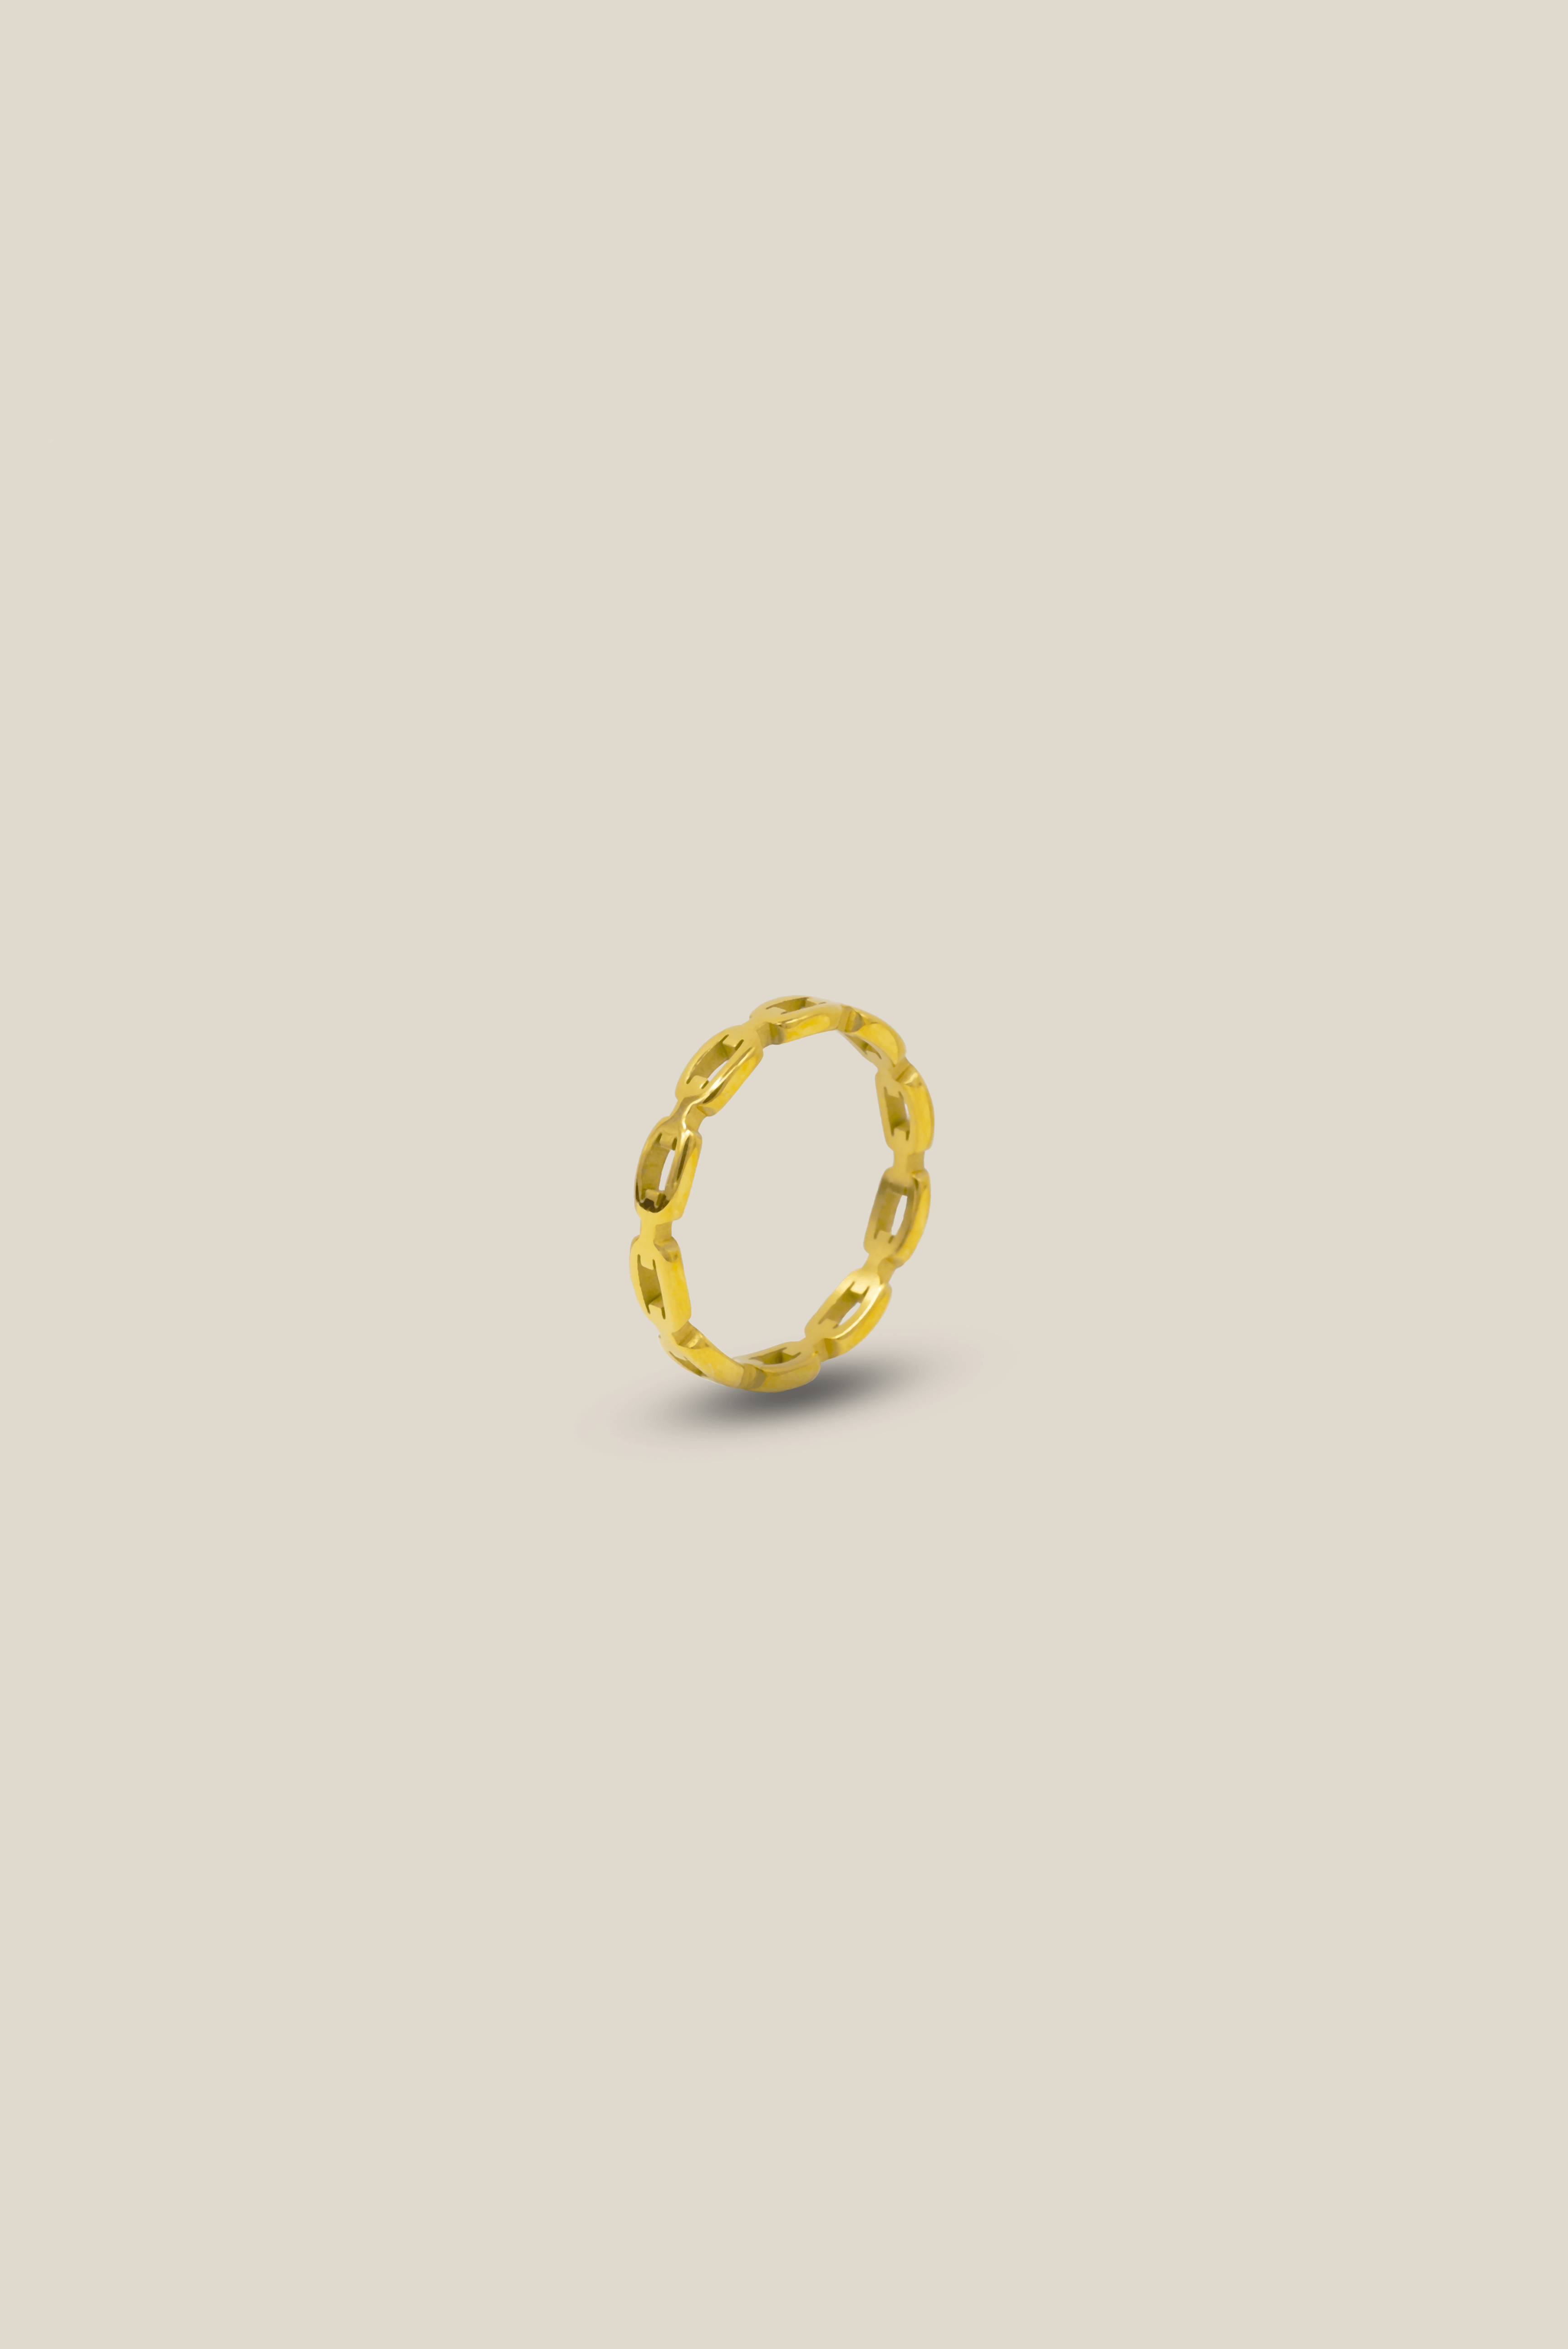 CHAIN (RING)